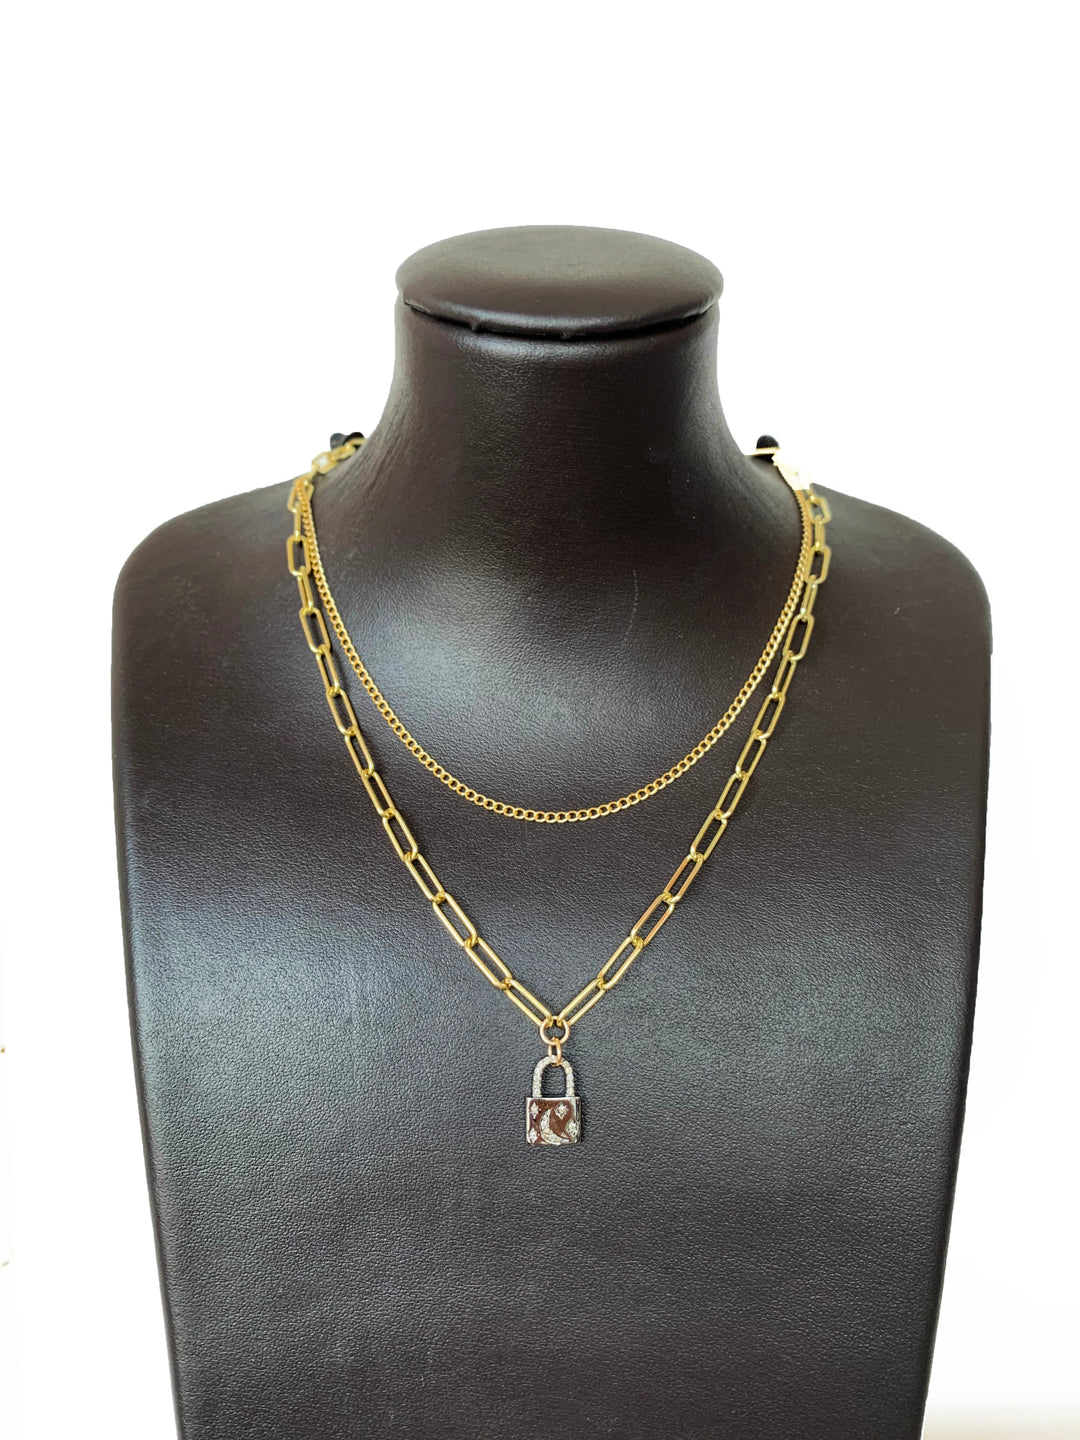 Layer Necklace With Lock - Kingfisher Road - Online Boutique